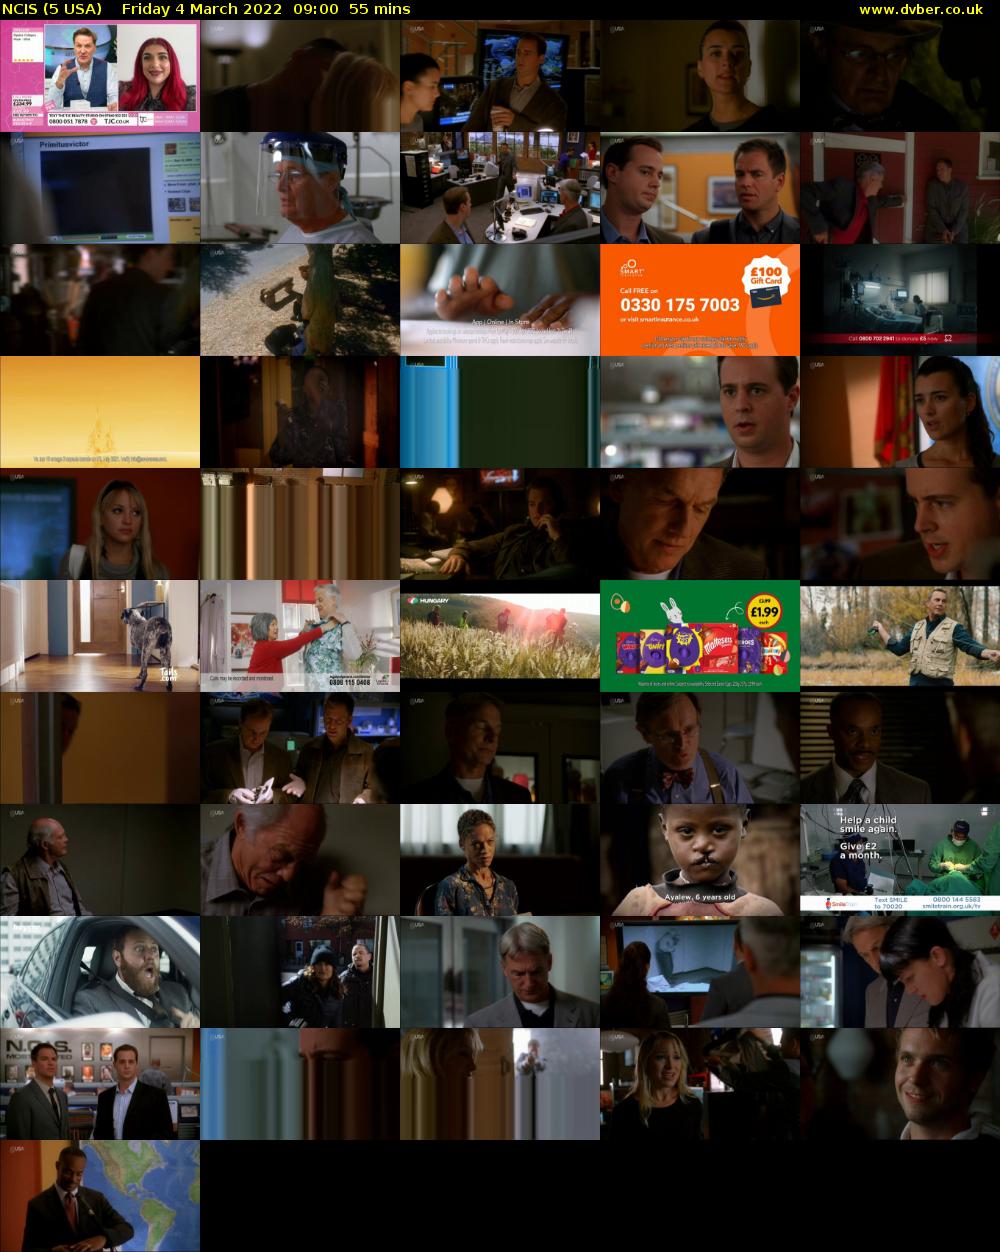 NCIS (5 USA) Friday 4 March 2022 09:00 - 09:55